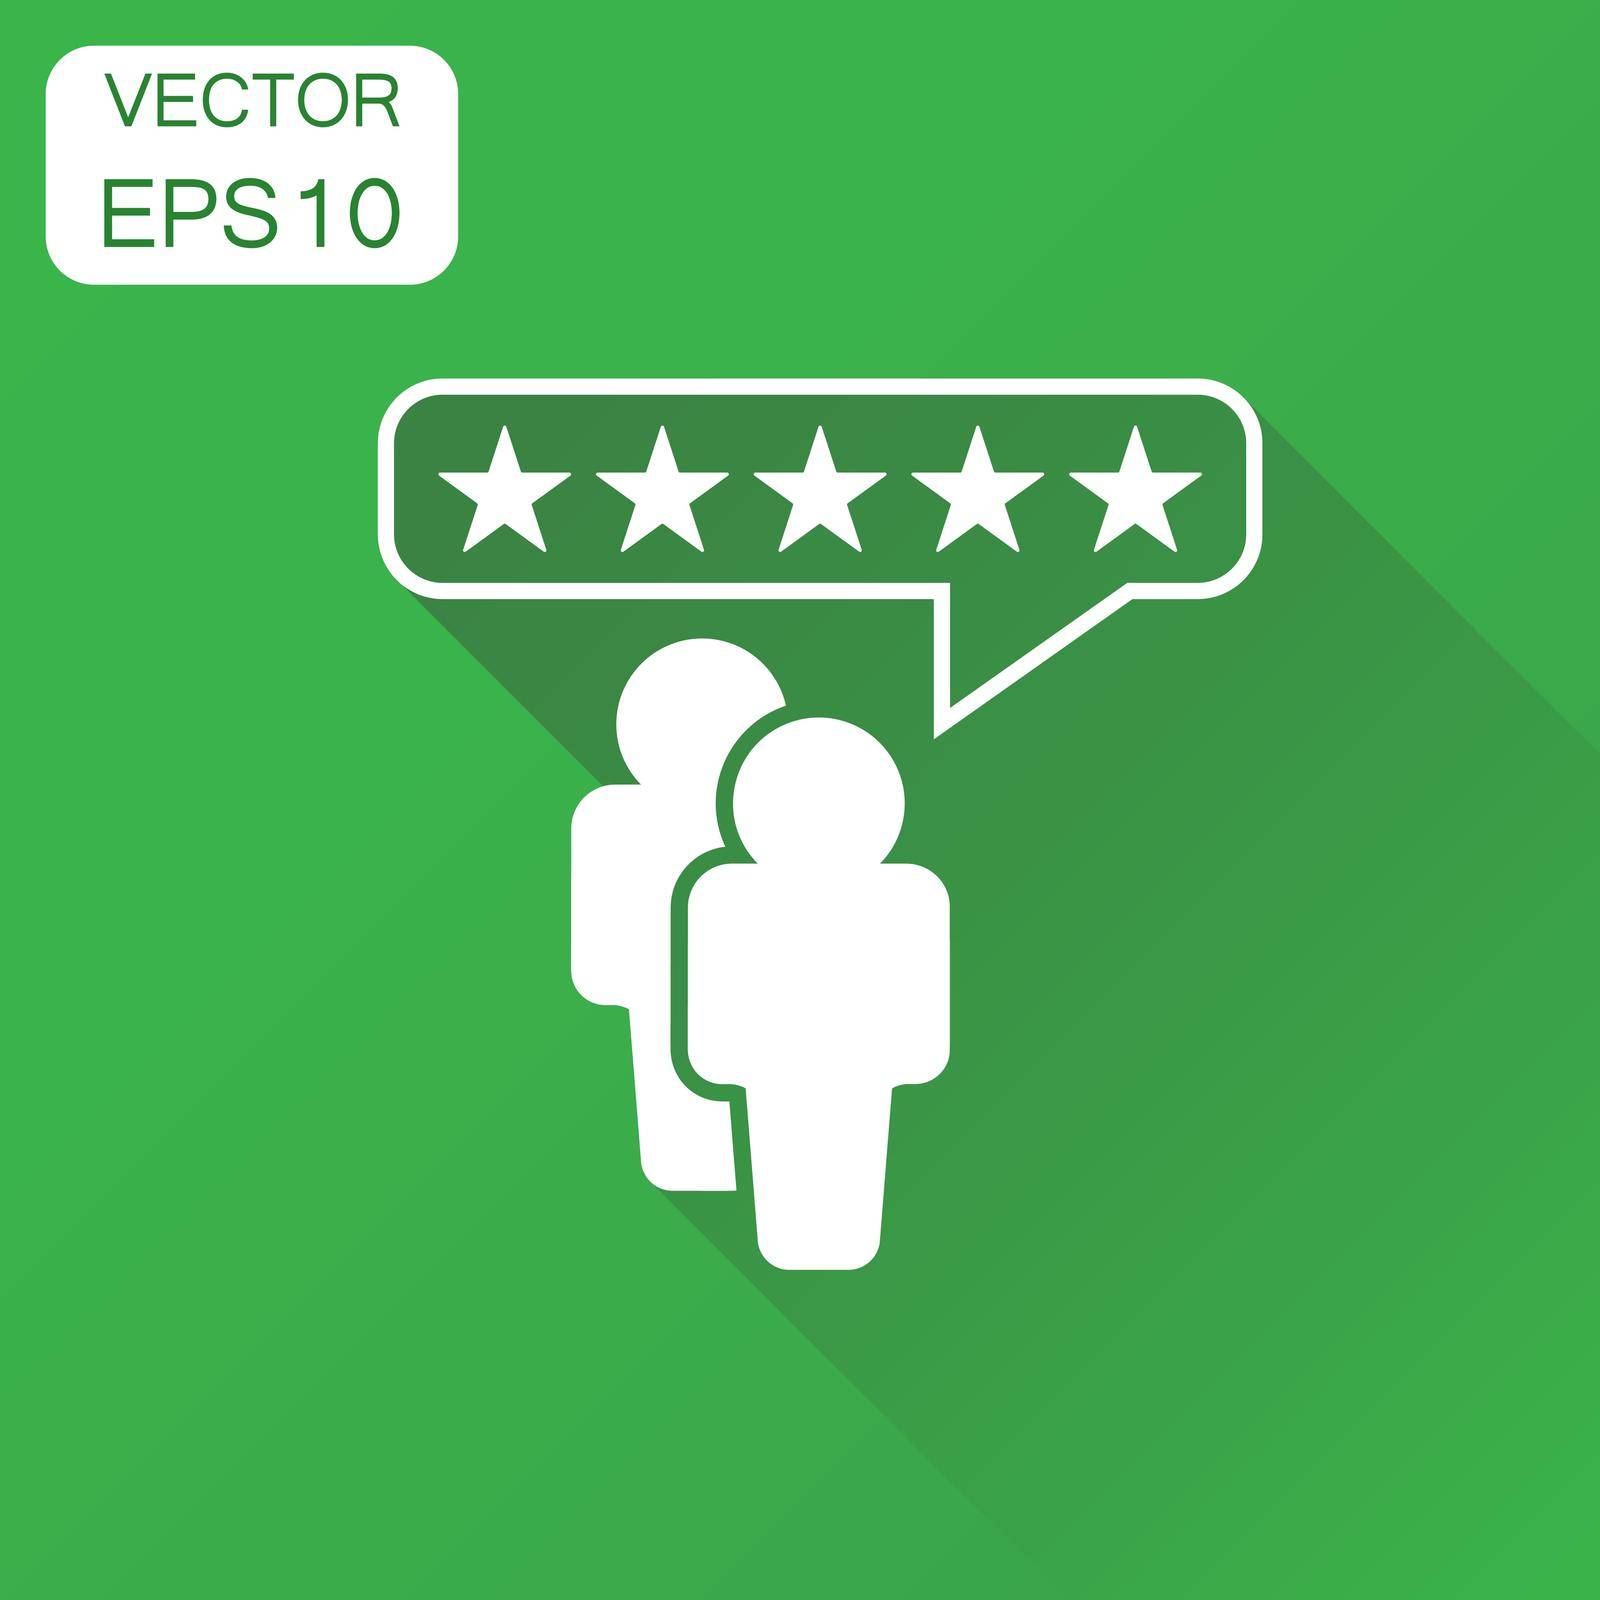 Customer reviews, rating, user feedback icon. Business concept rating pictogram. Vector illustration on green background with long shadow.